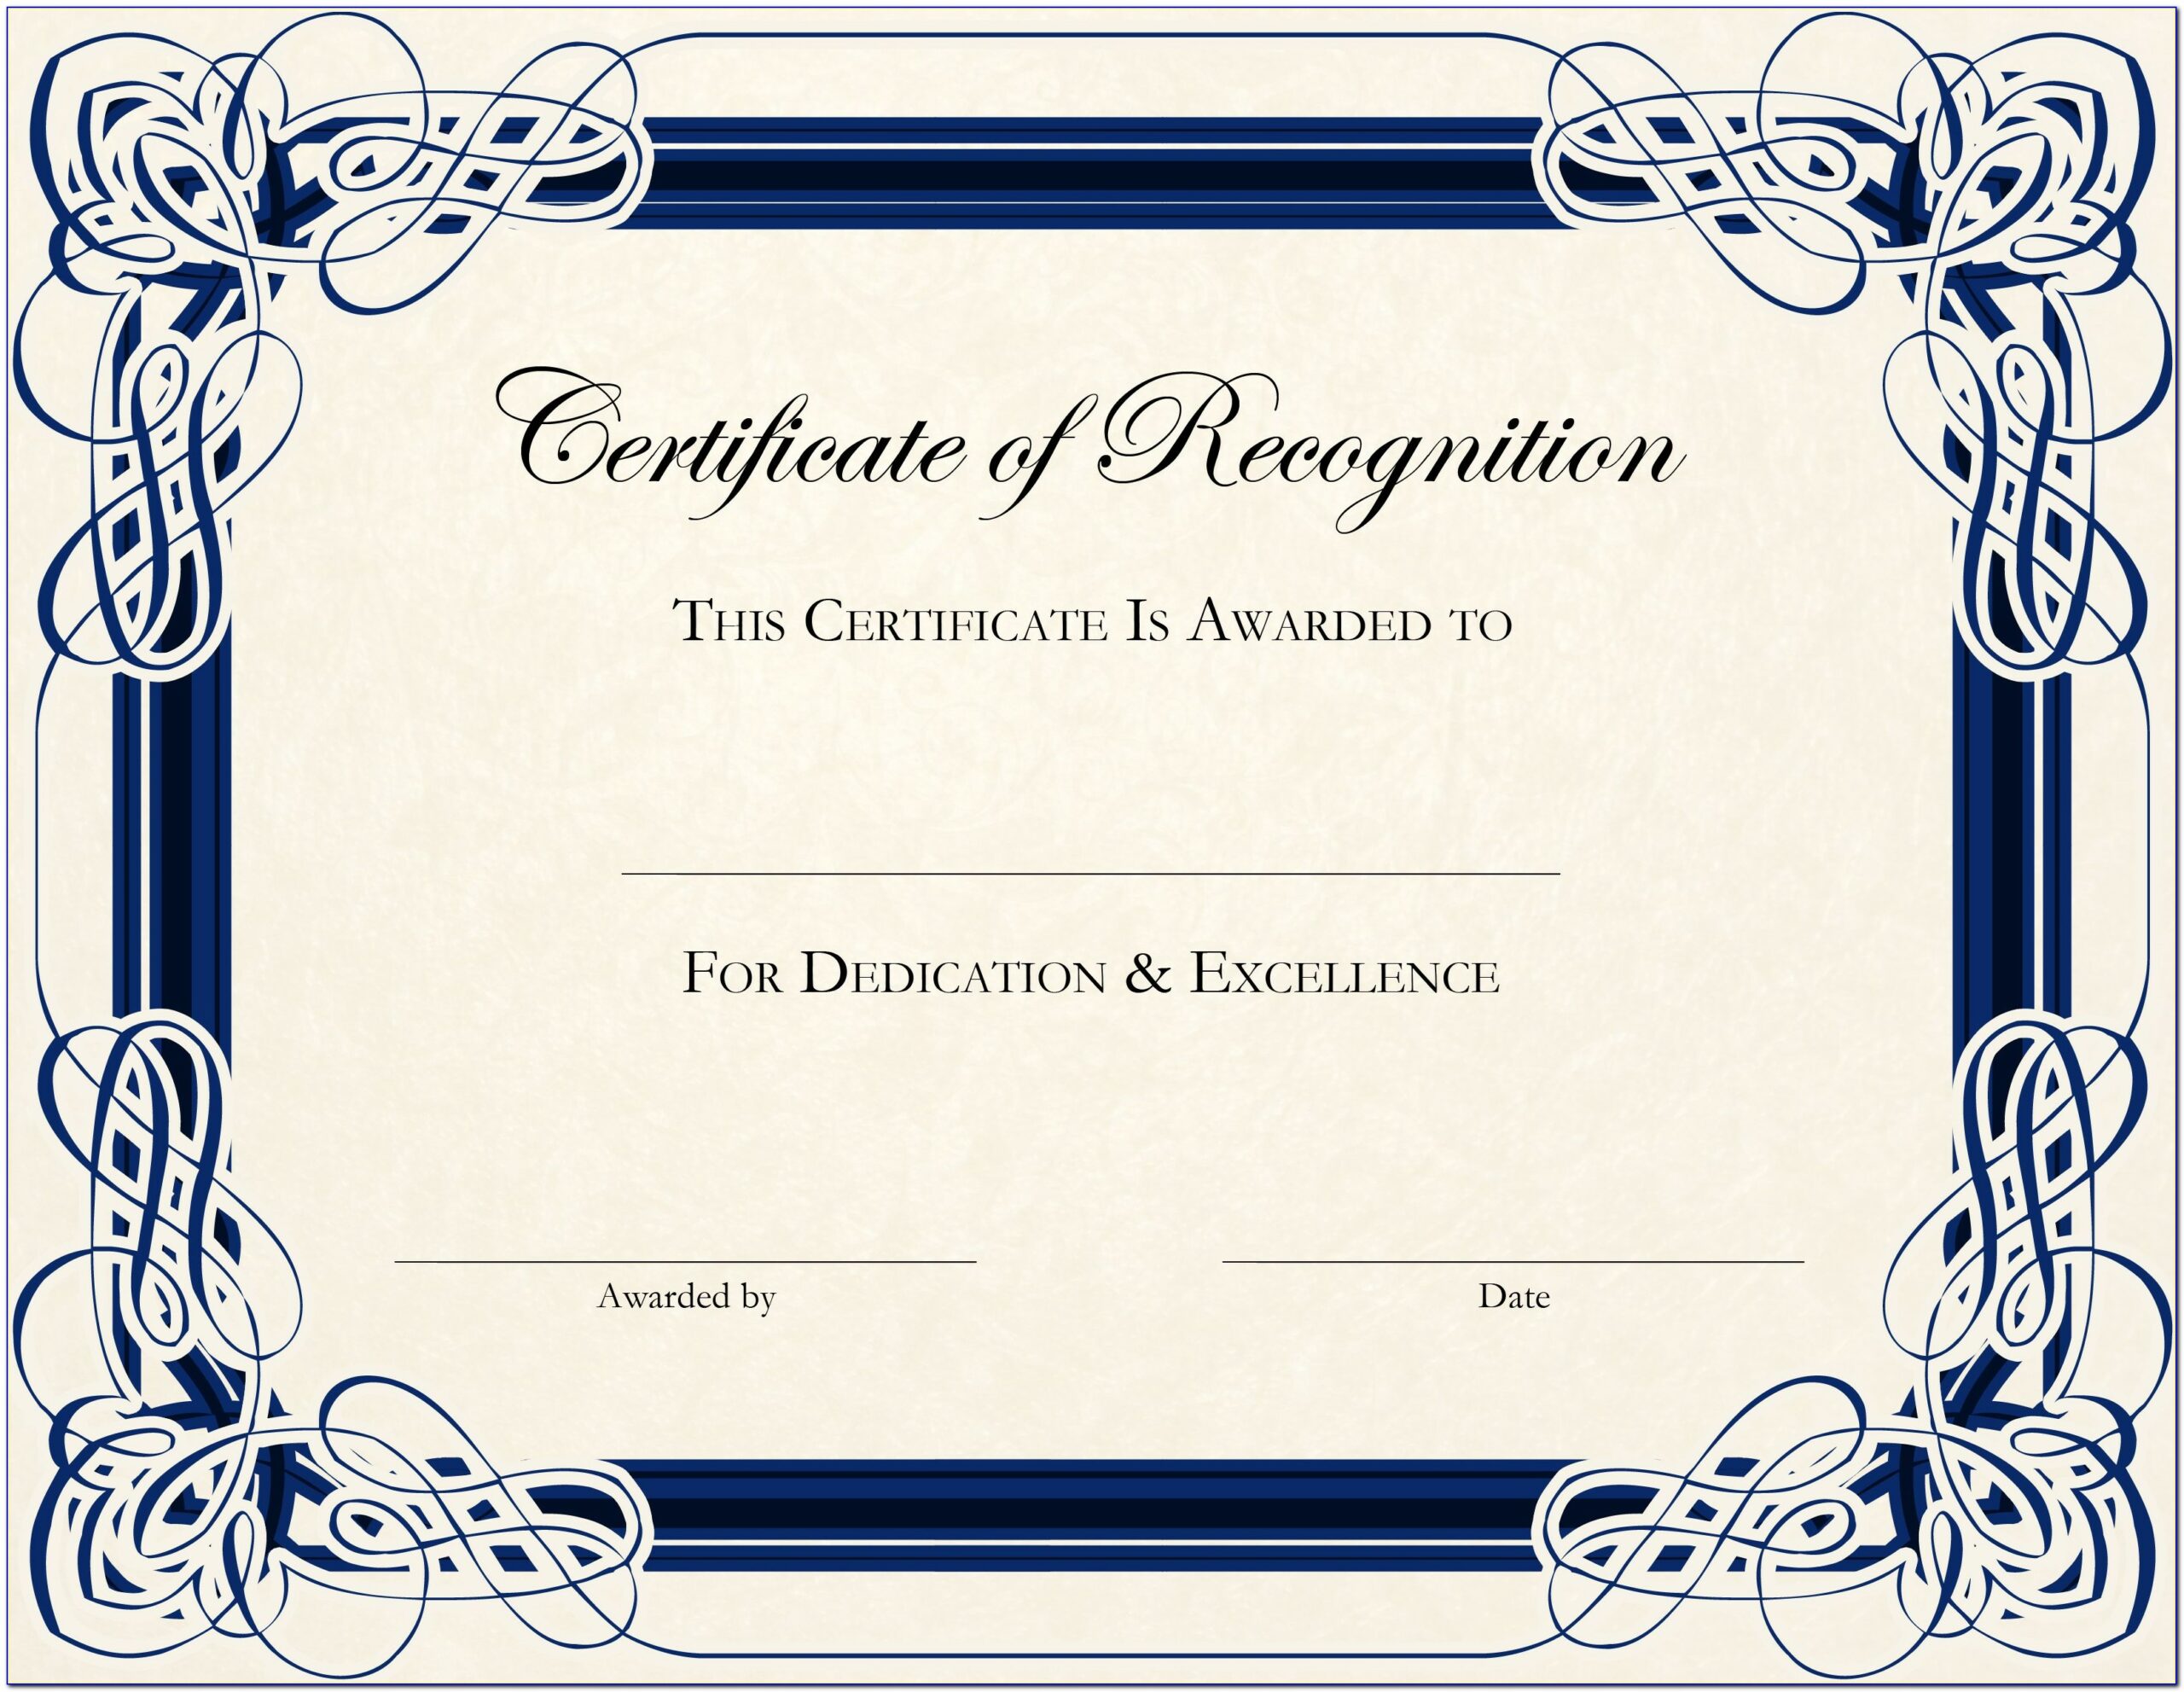 Certificate Of Recognition Microsoft Templates